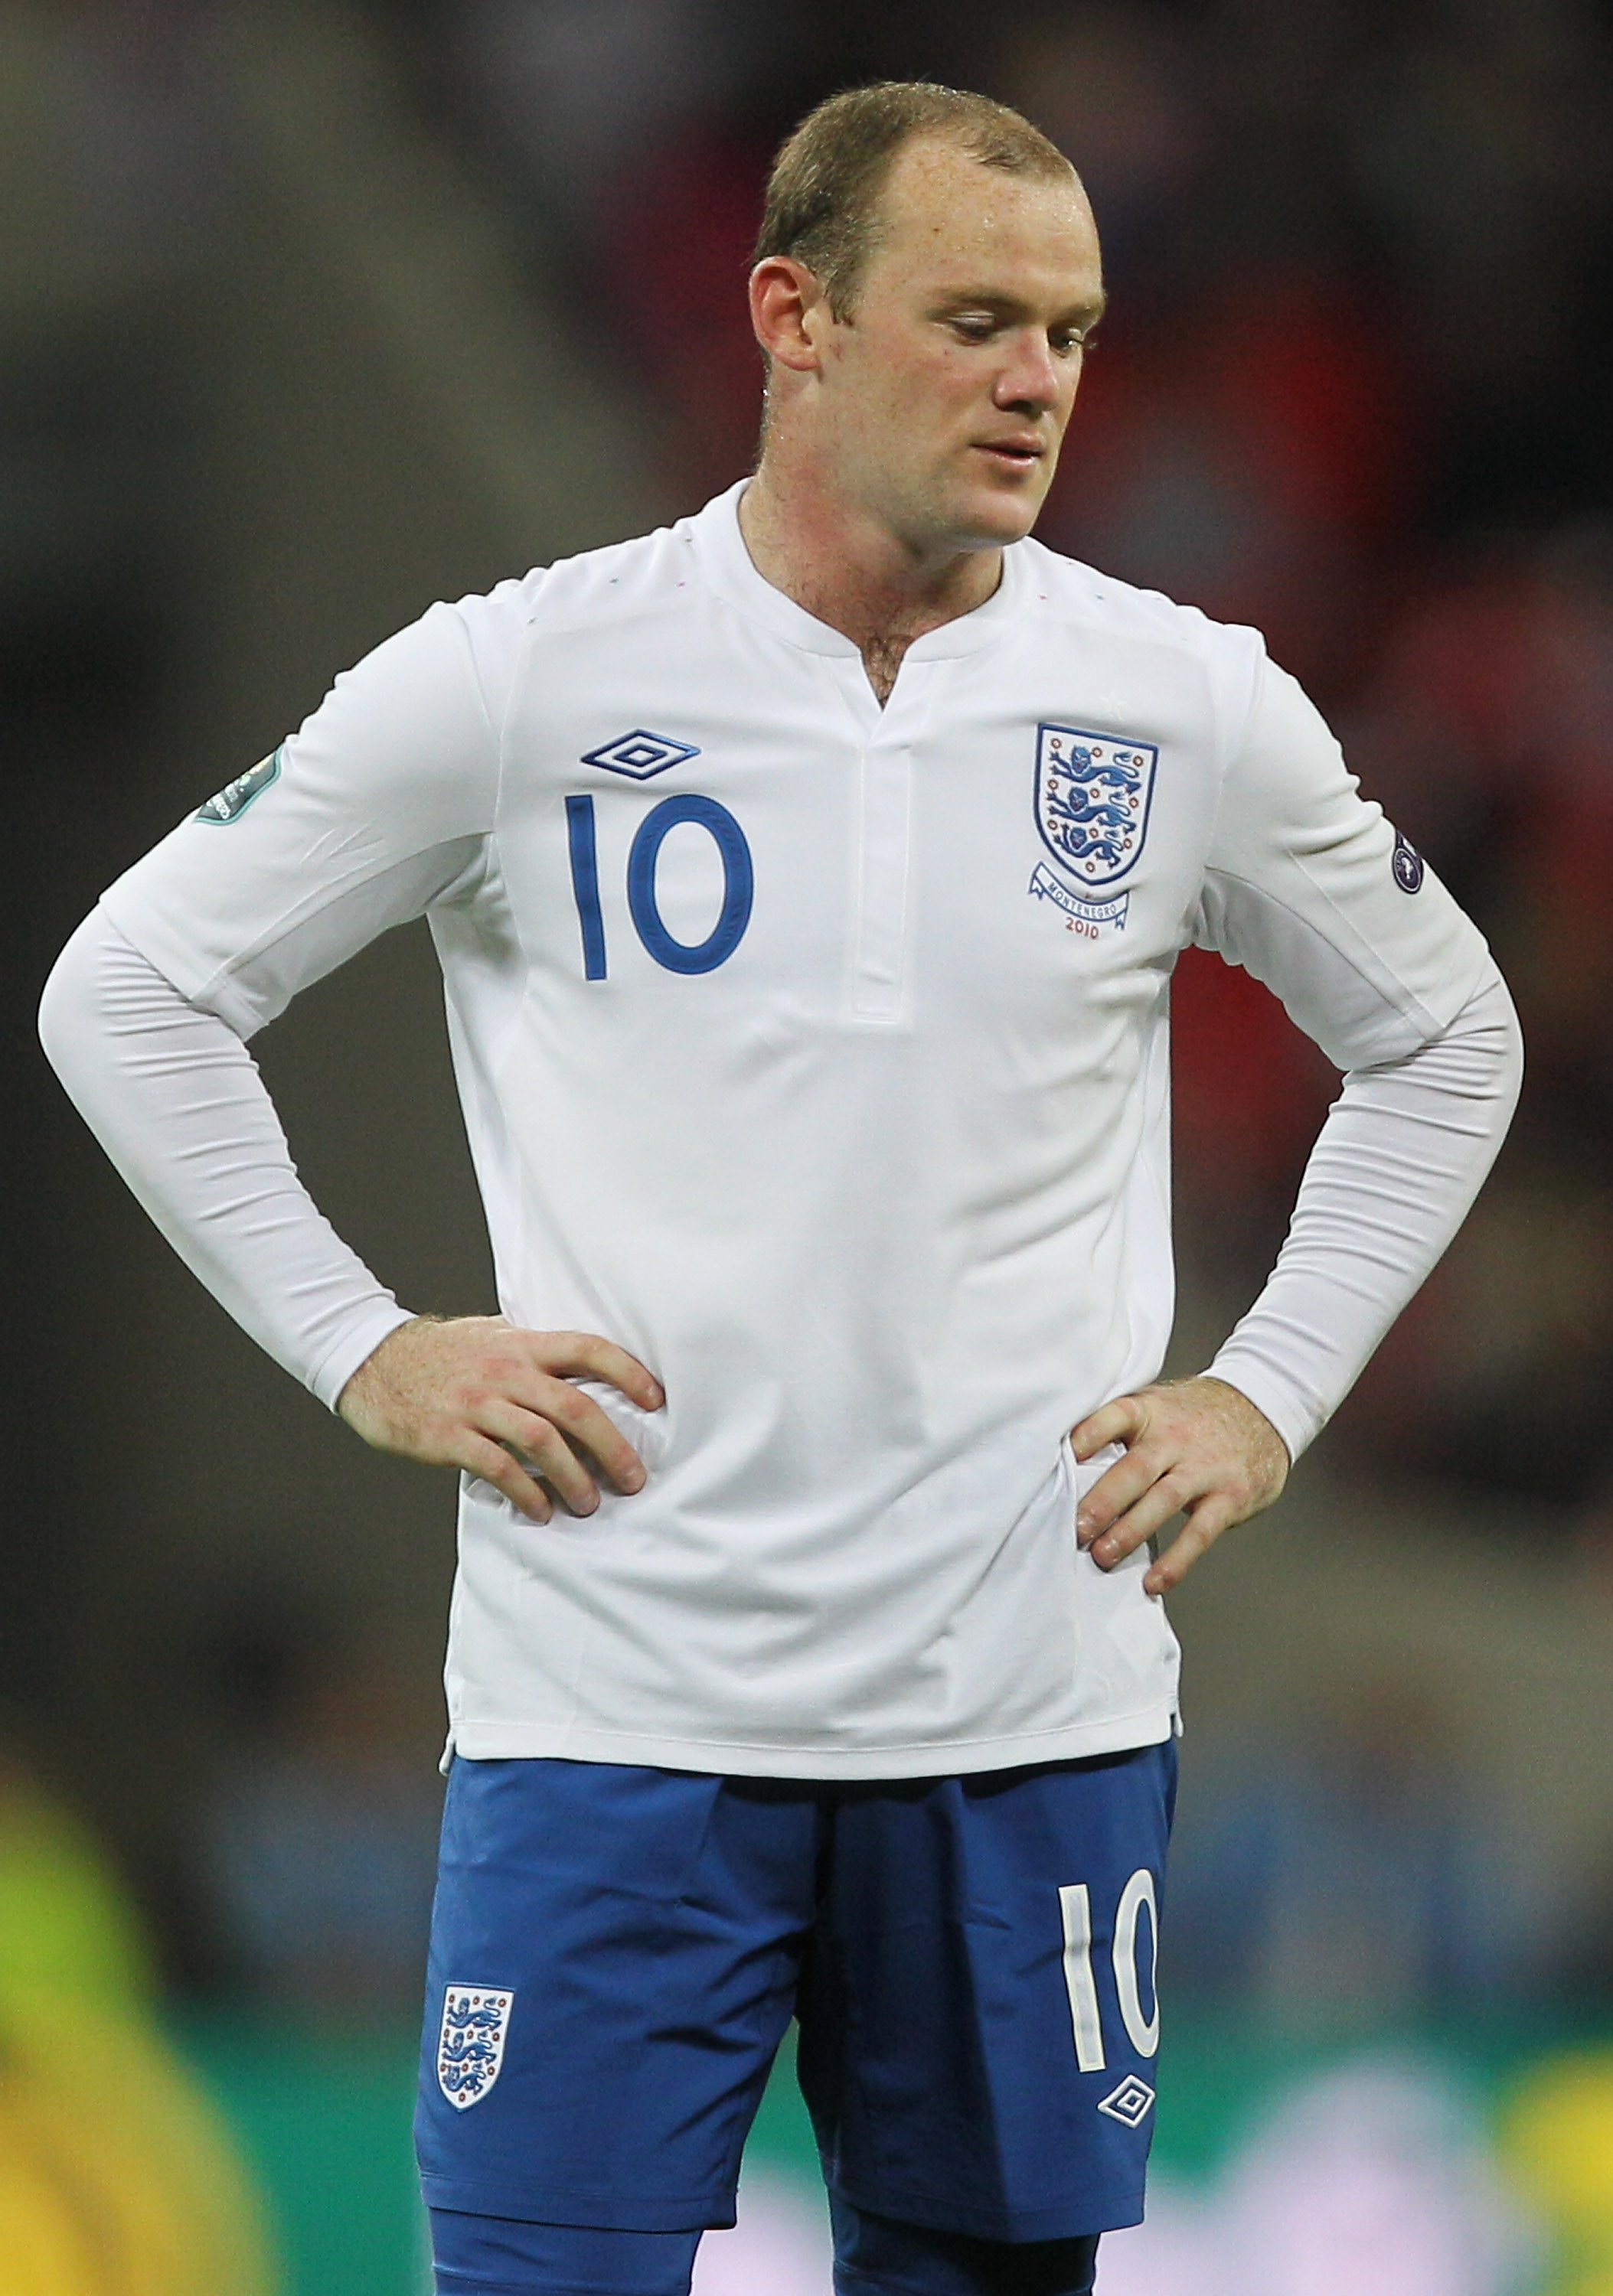 LONDON, ENGLAND - OCTOBER 12: Wayne Rooney of England looks dejected during the UEFA EURO 2012 Group G Qualifying match between England and Montenegro at Wembley Stadium on October 12, 2010 in London, England.  (Photo by Hamish Blair/Getty Images)